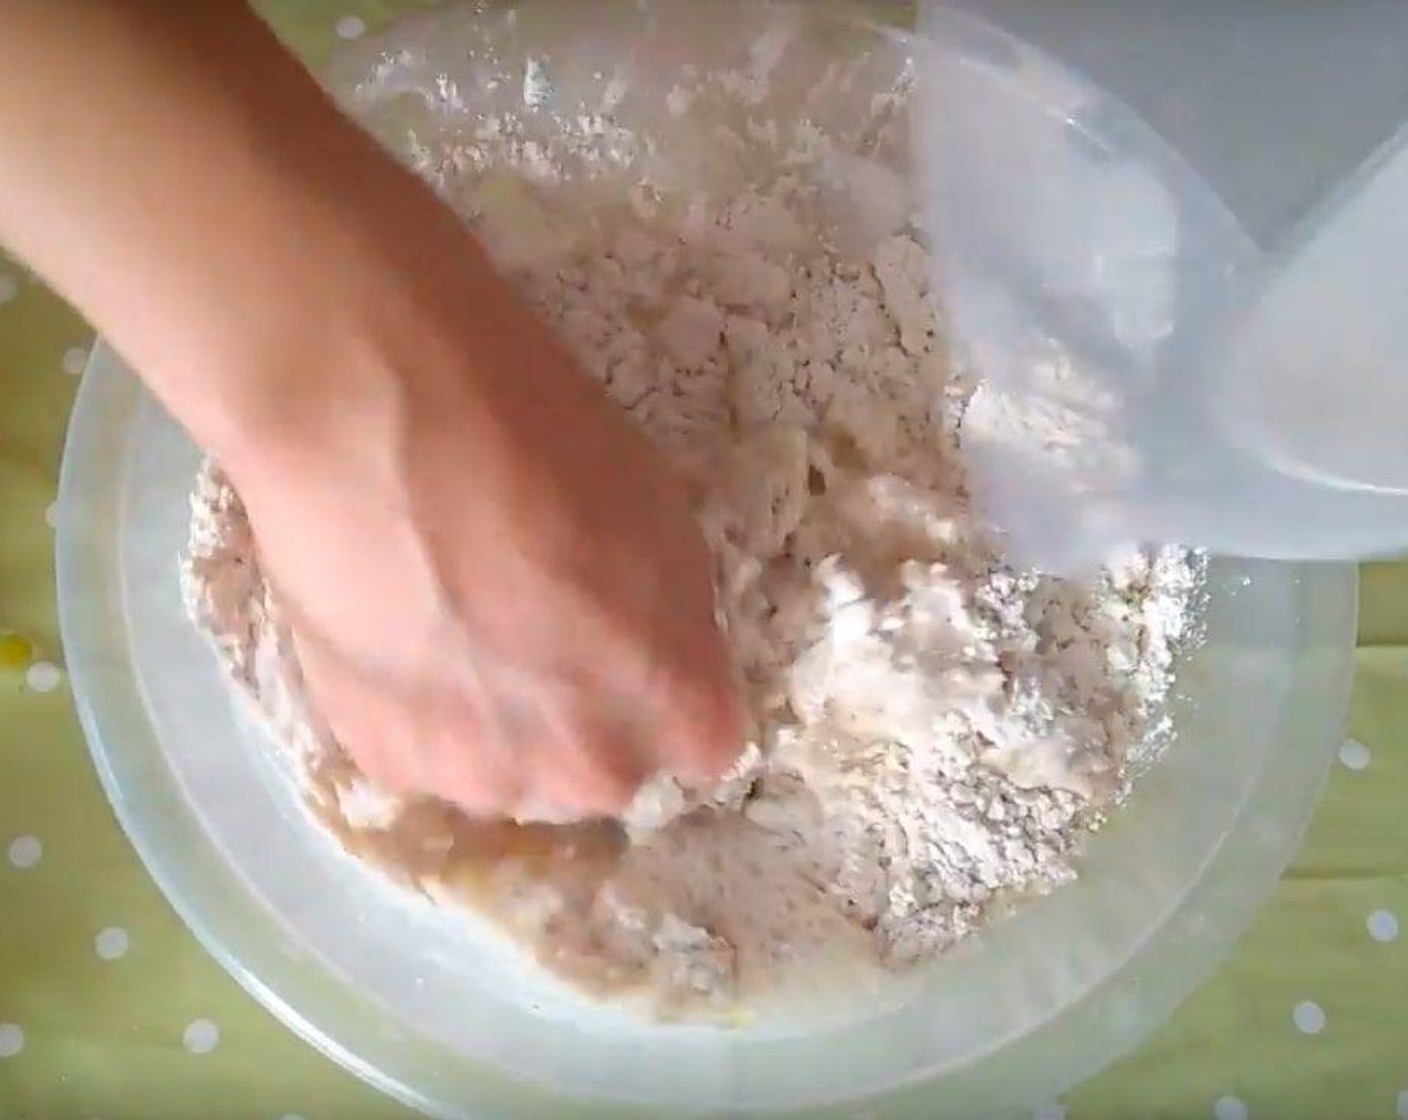 step 6 In a bowl add All-Purpose Flour (3 2/3 cups), Brown Sugar (1 Tbsp), Instant Dry Yeast (1/2 Tbsp), Oil (1 Tbsp), and Salt (1 Tbsp), then add Water (1 1/4 cups) in slowly and knead with your hands.